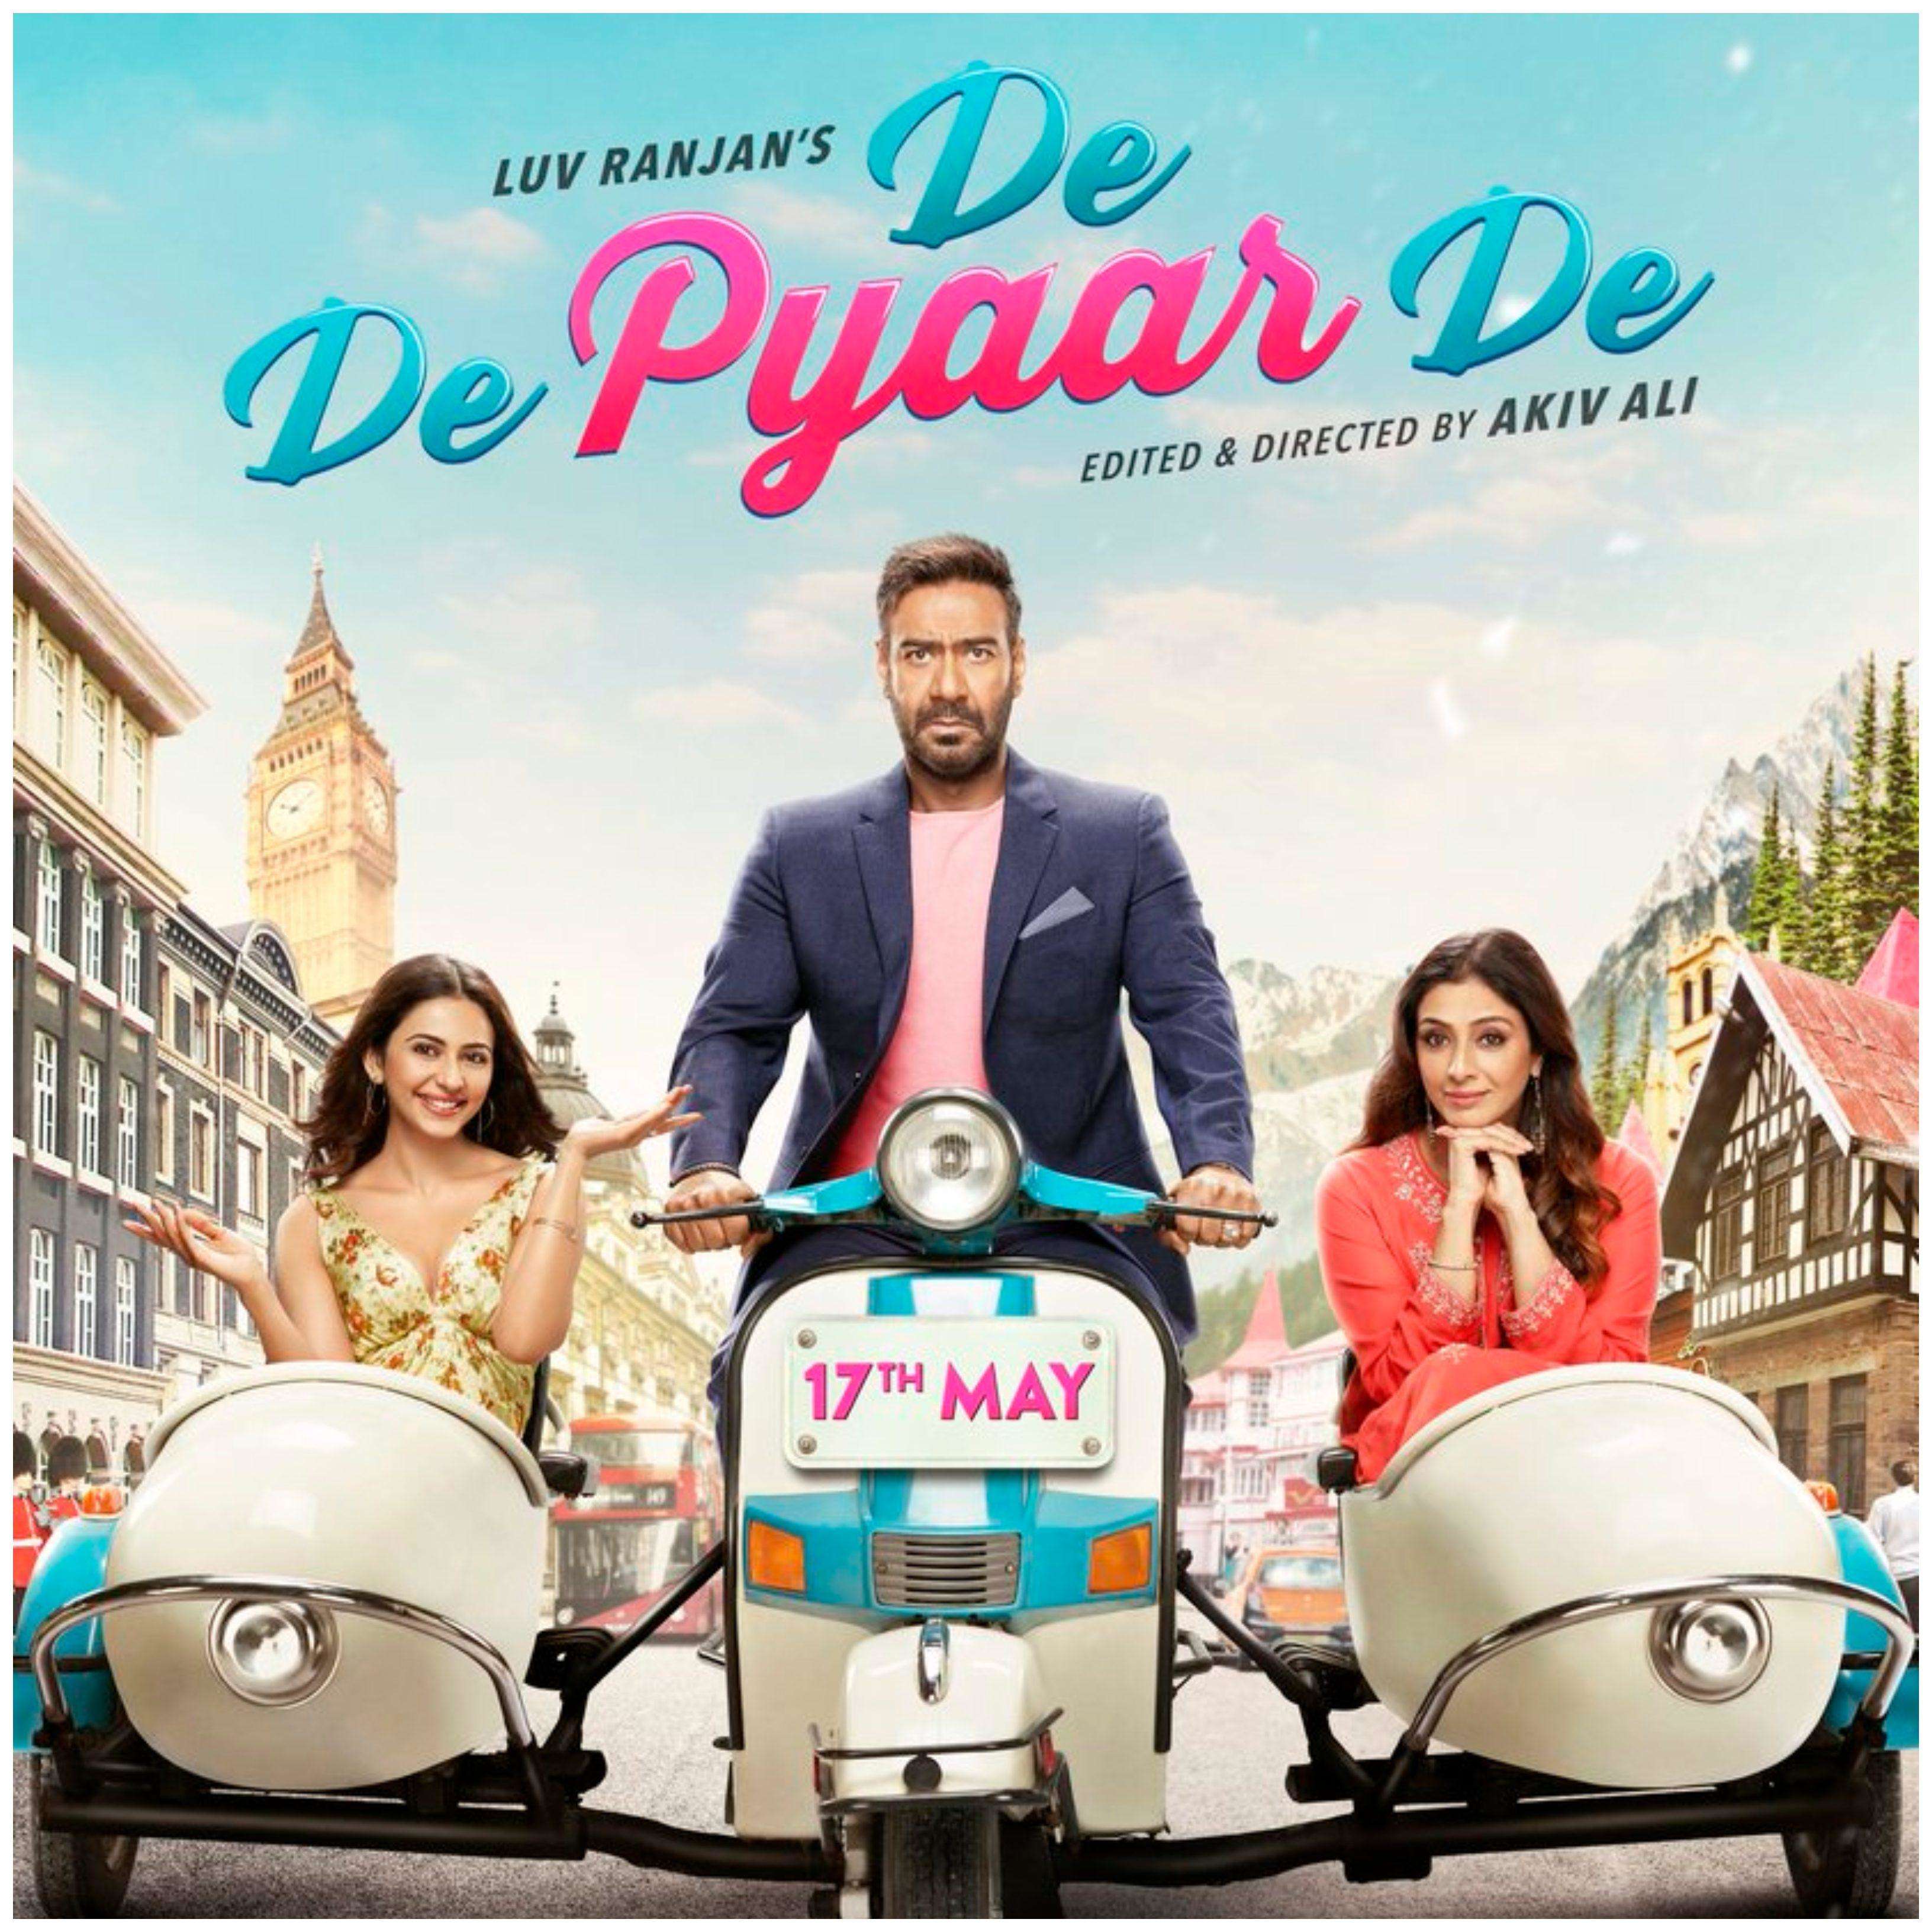 ‘De De Pyaar De’ review: Despite stunning performances by Tabu in the movie, hard-to-digest for middle class.